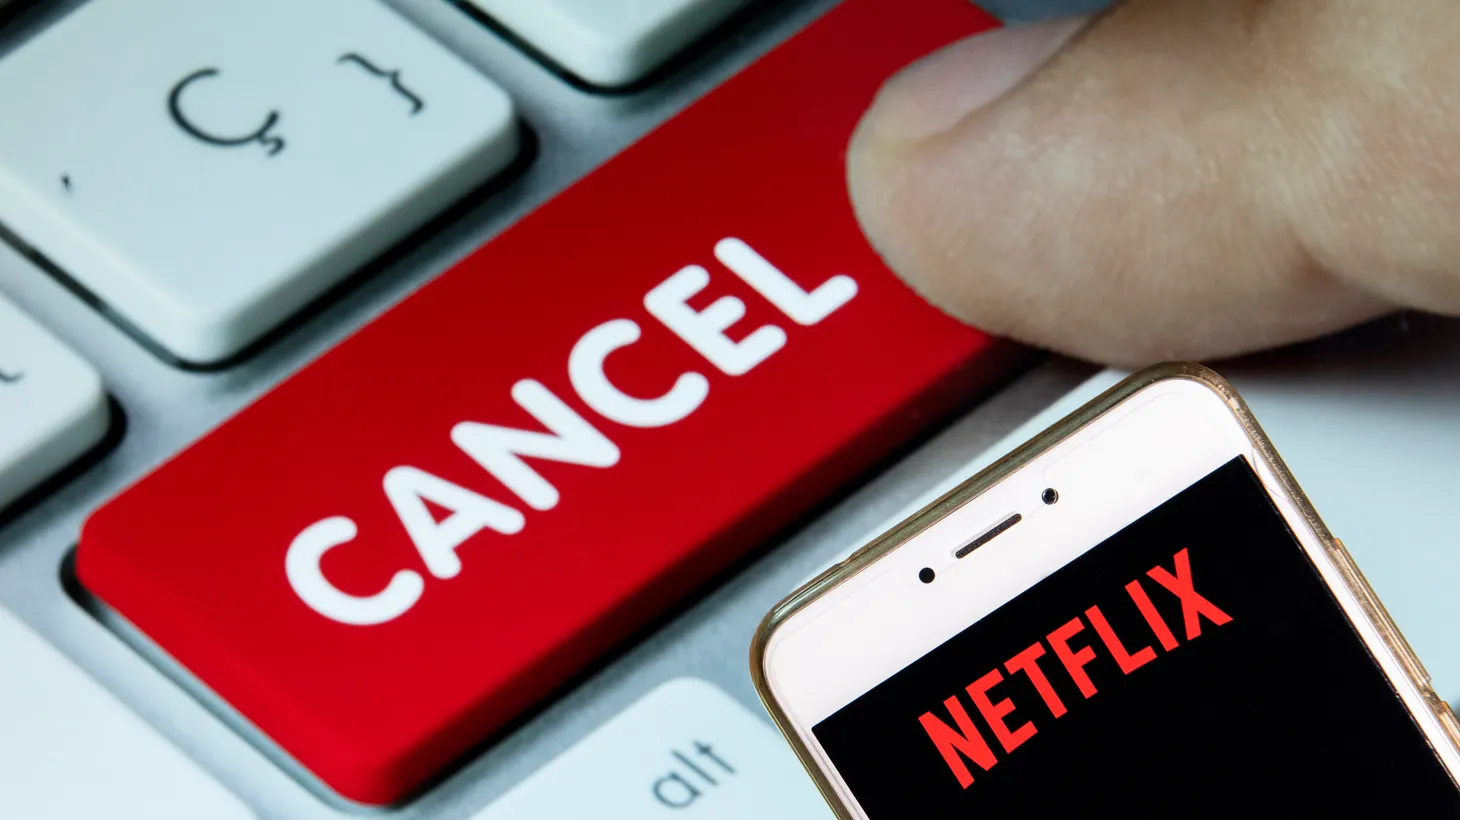 Netflix announced on Tuesday that it lost subscribers for the first time in more than a decade.